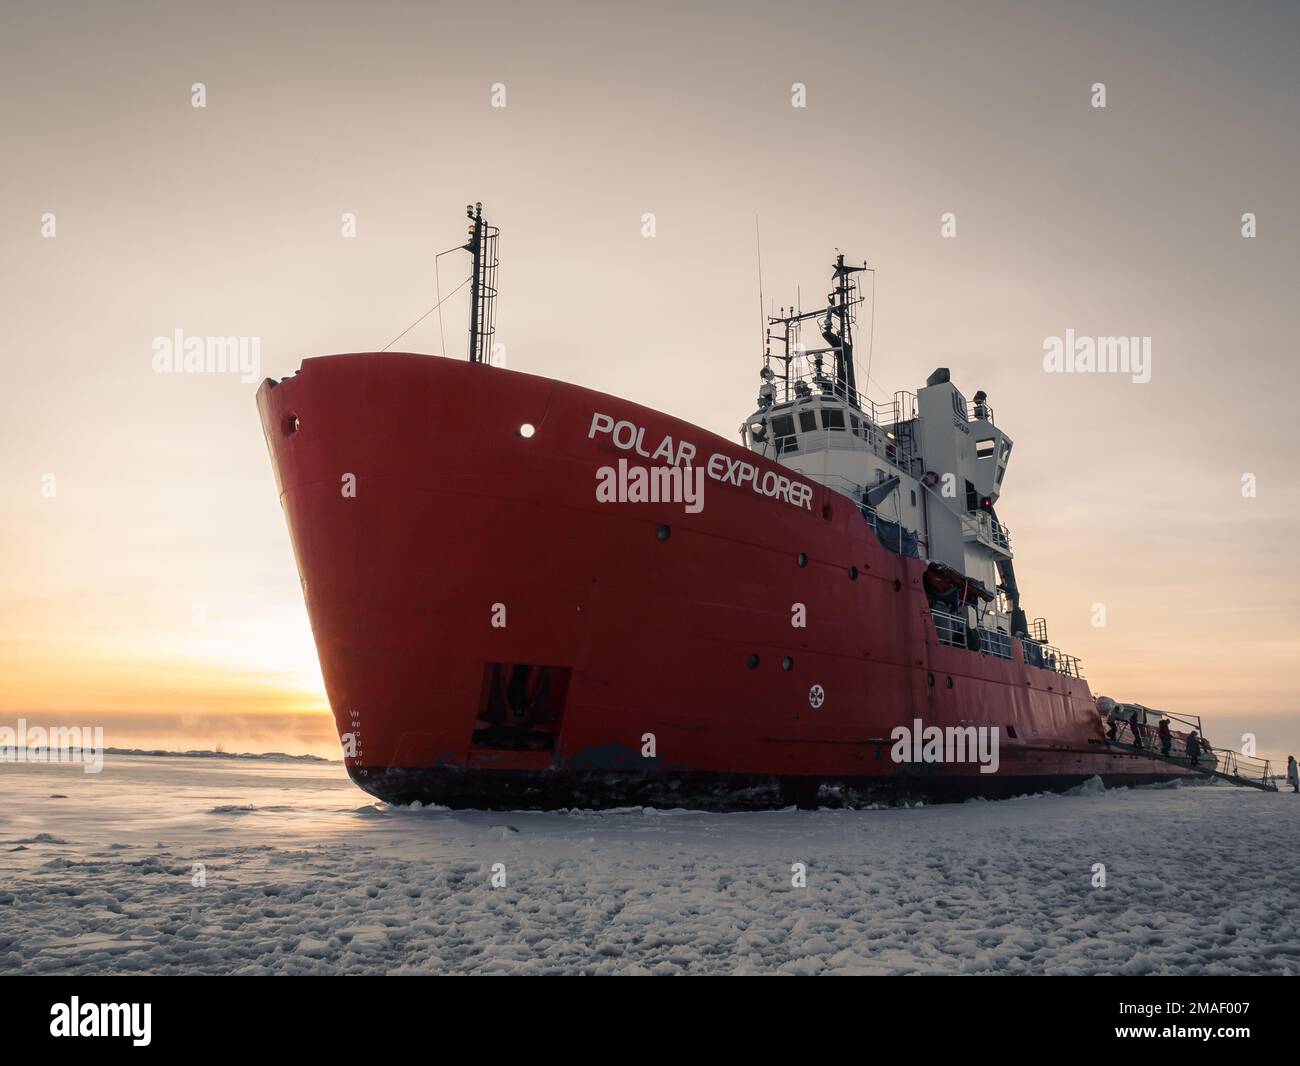 People getting on ice breaker during sunset in the arctic. Stock Photo